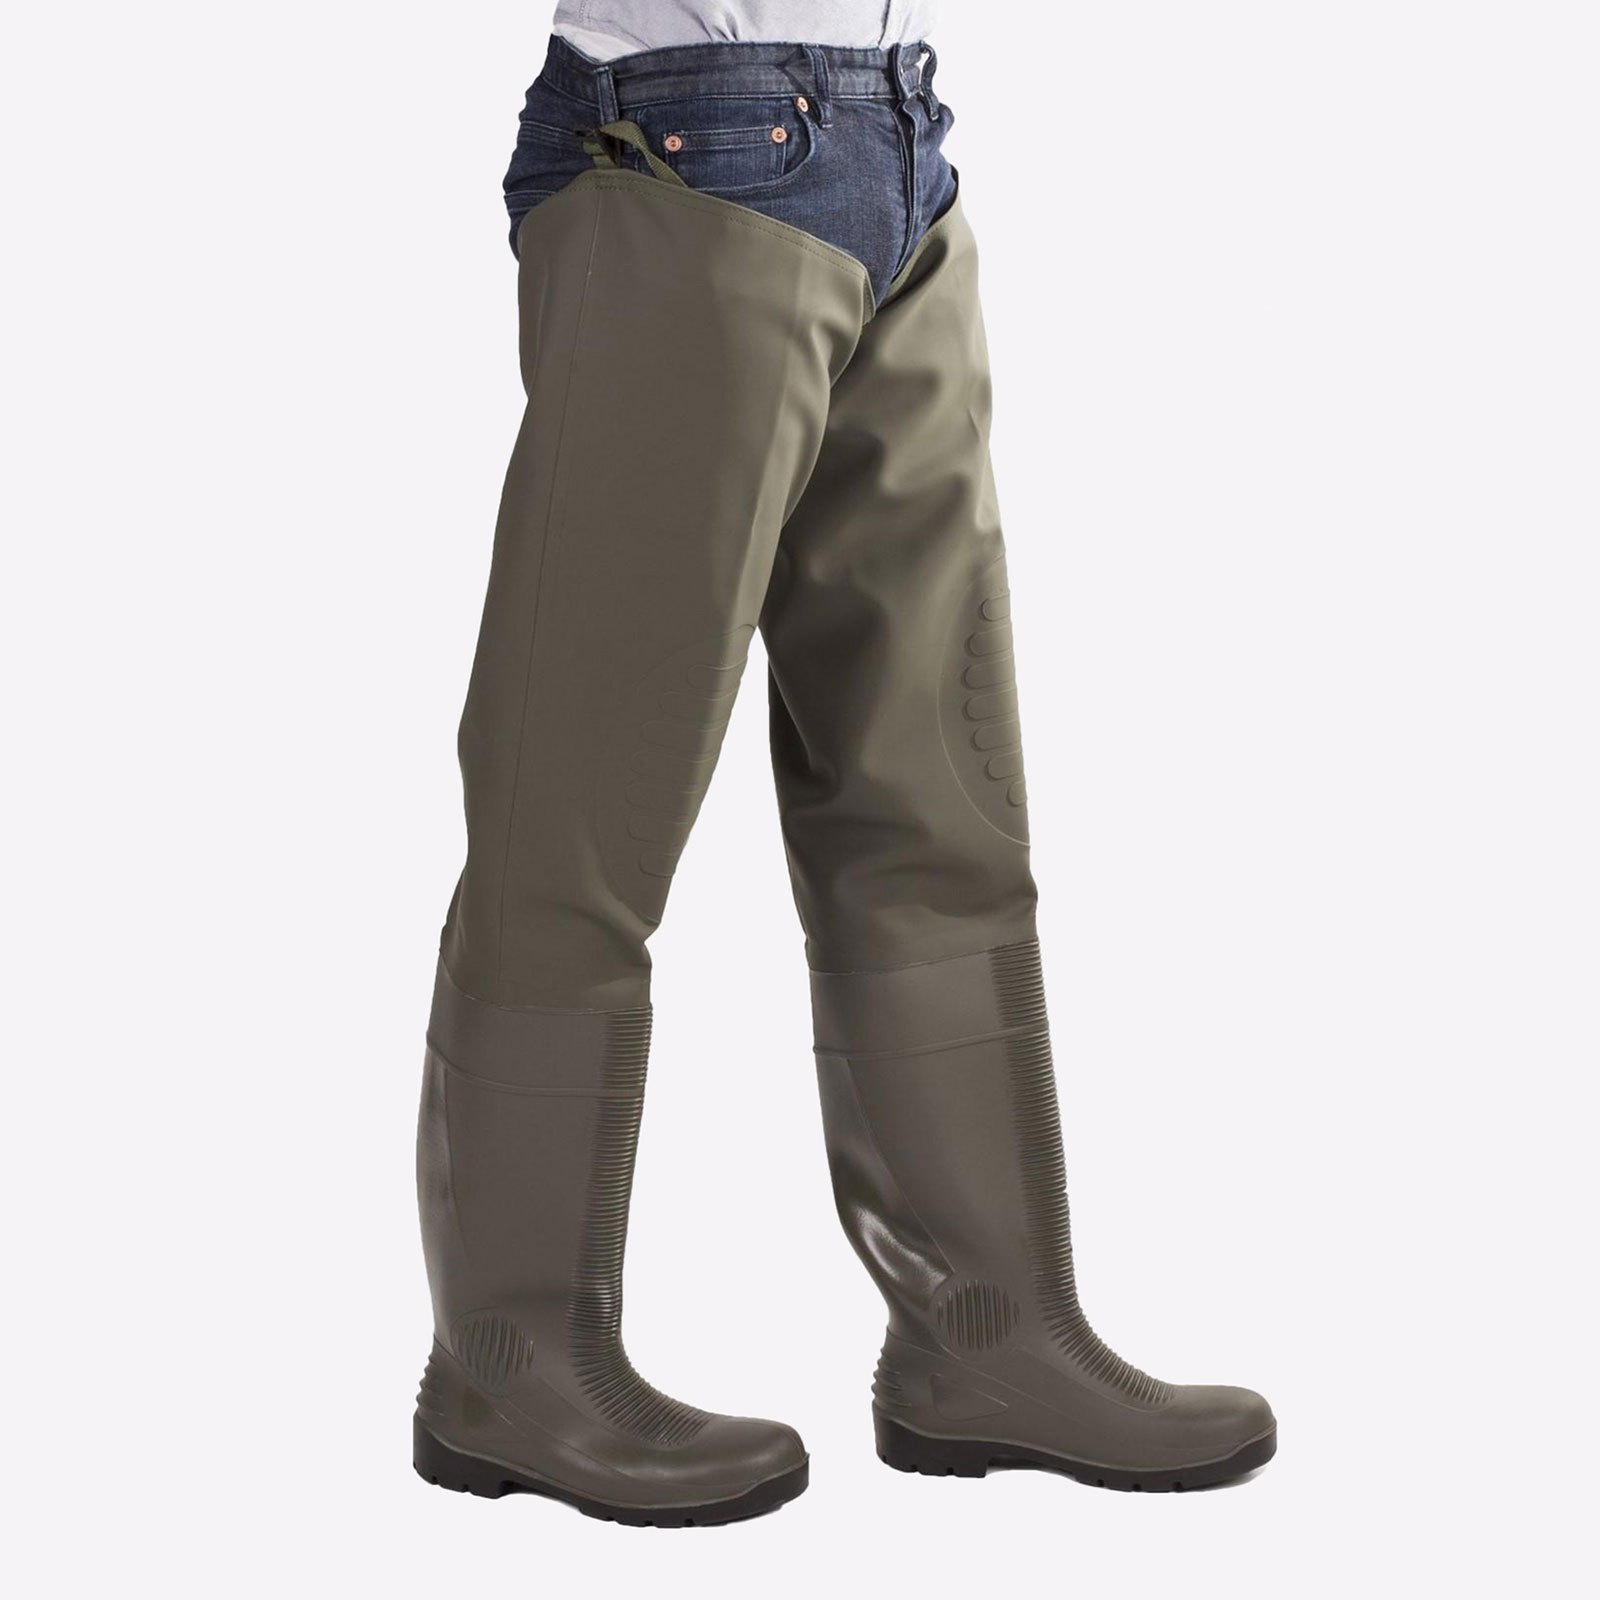 Amblers Safety Forth WATERPROOF Thigh Safety Wader - GRD-24879-41144-13